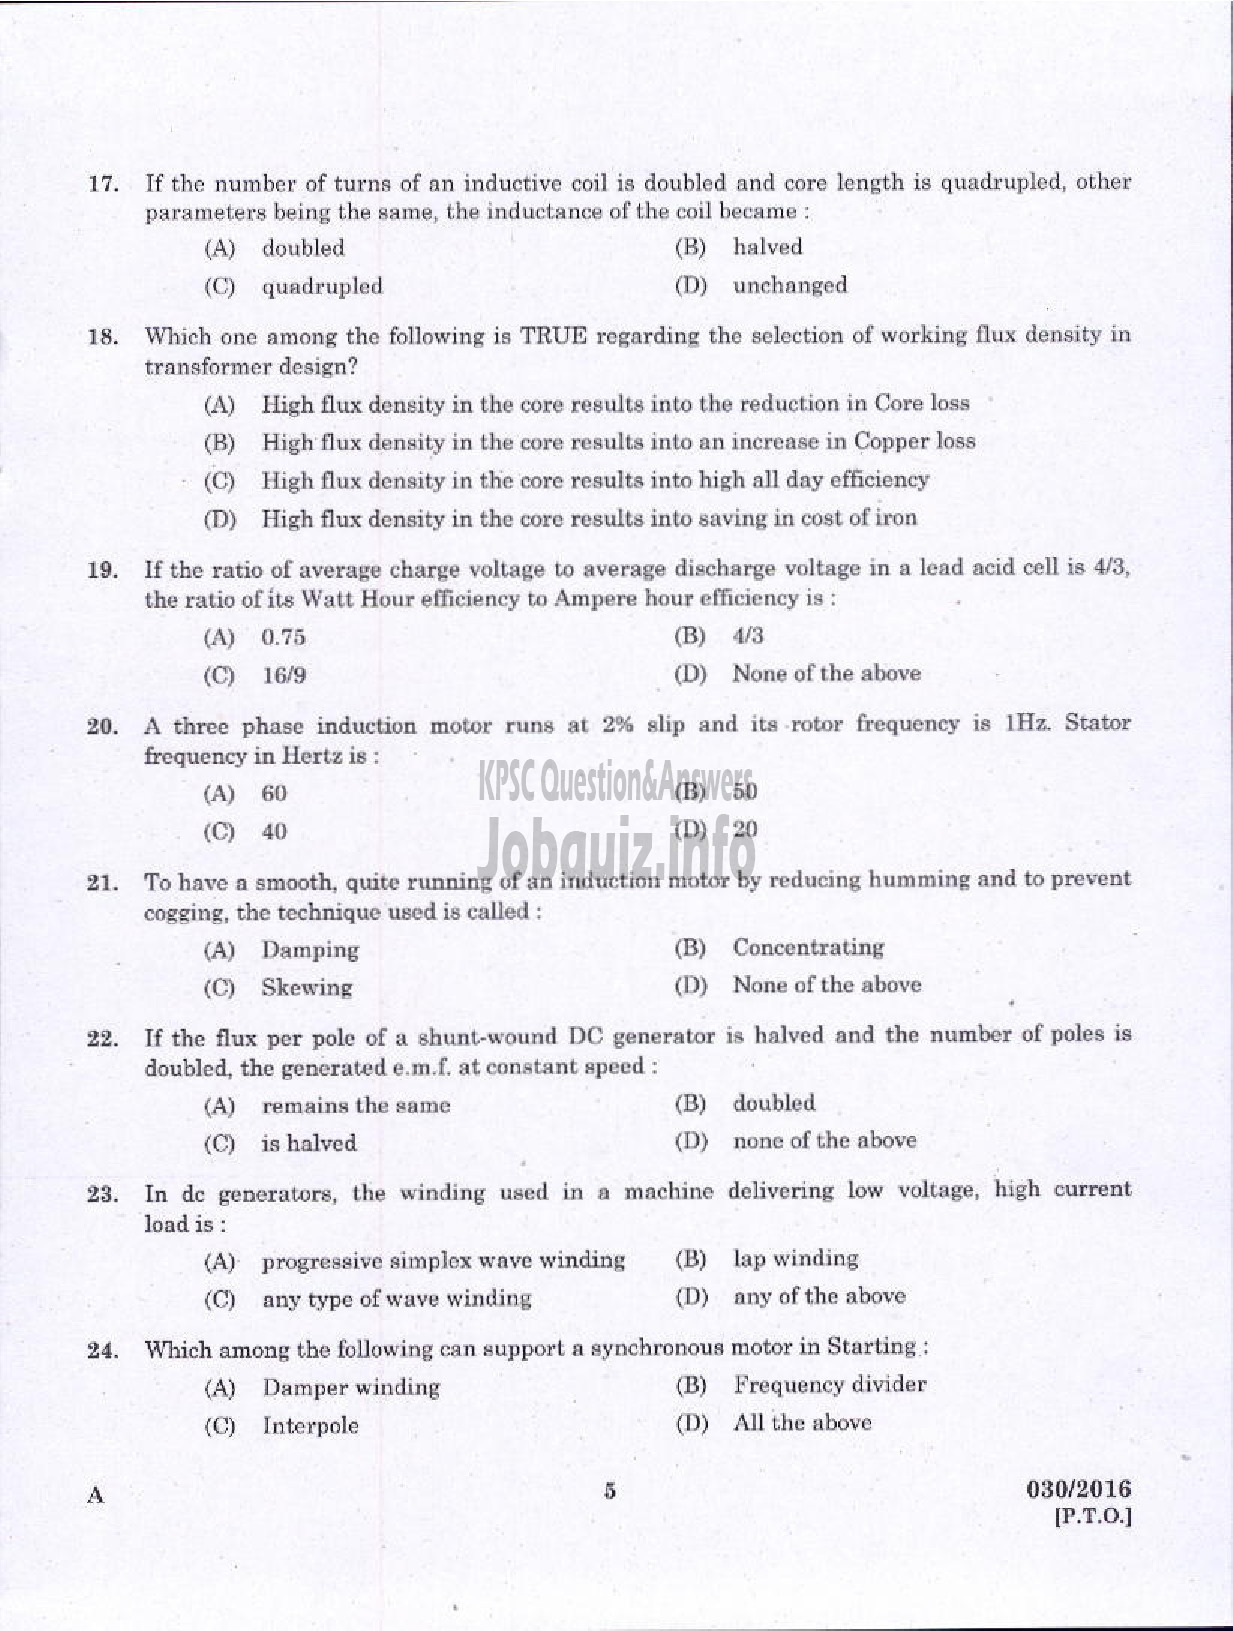 Kerala PSC Question Paper - ASSISTANT ENGINEER ELECTRICAL HARBOUR ENGINEERING-3